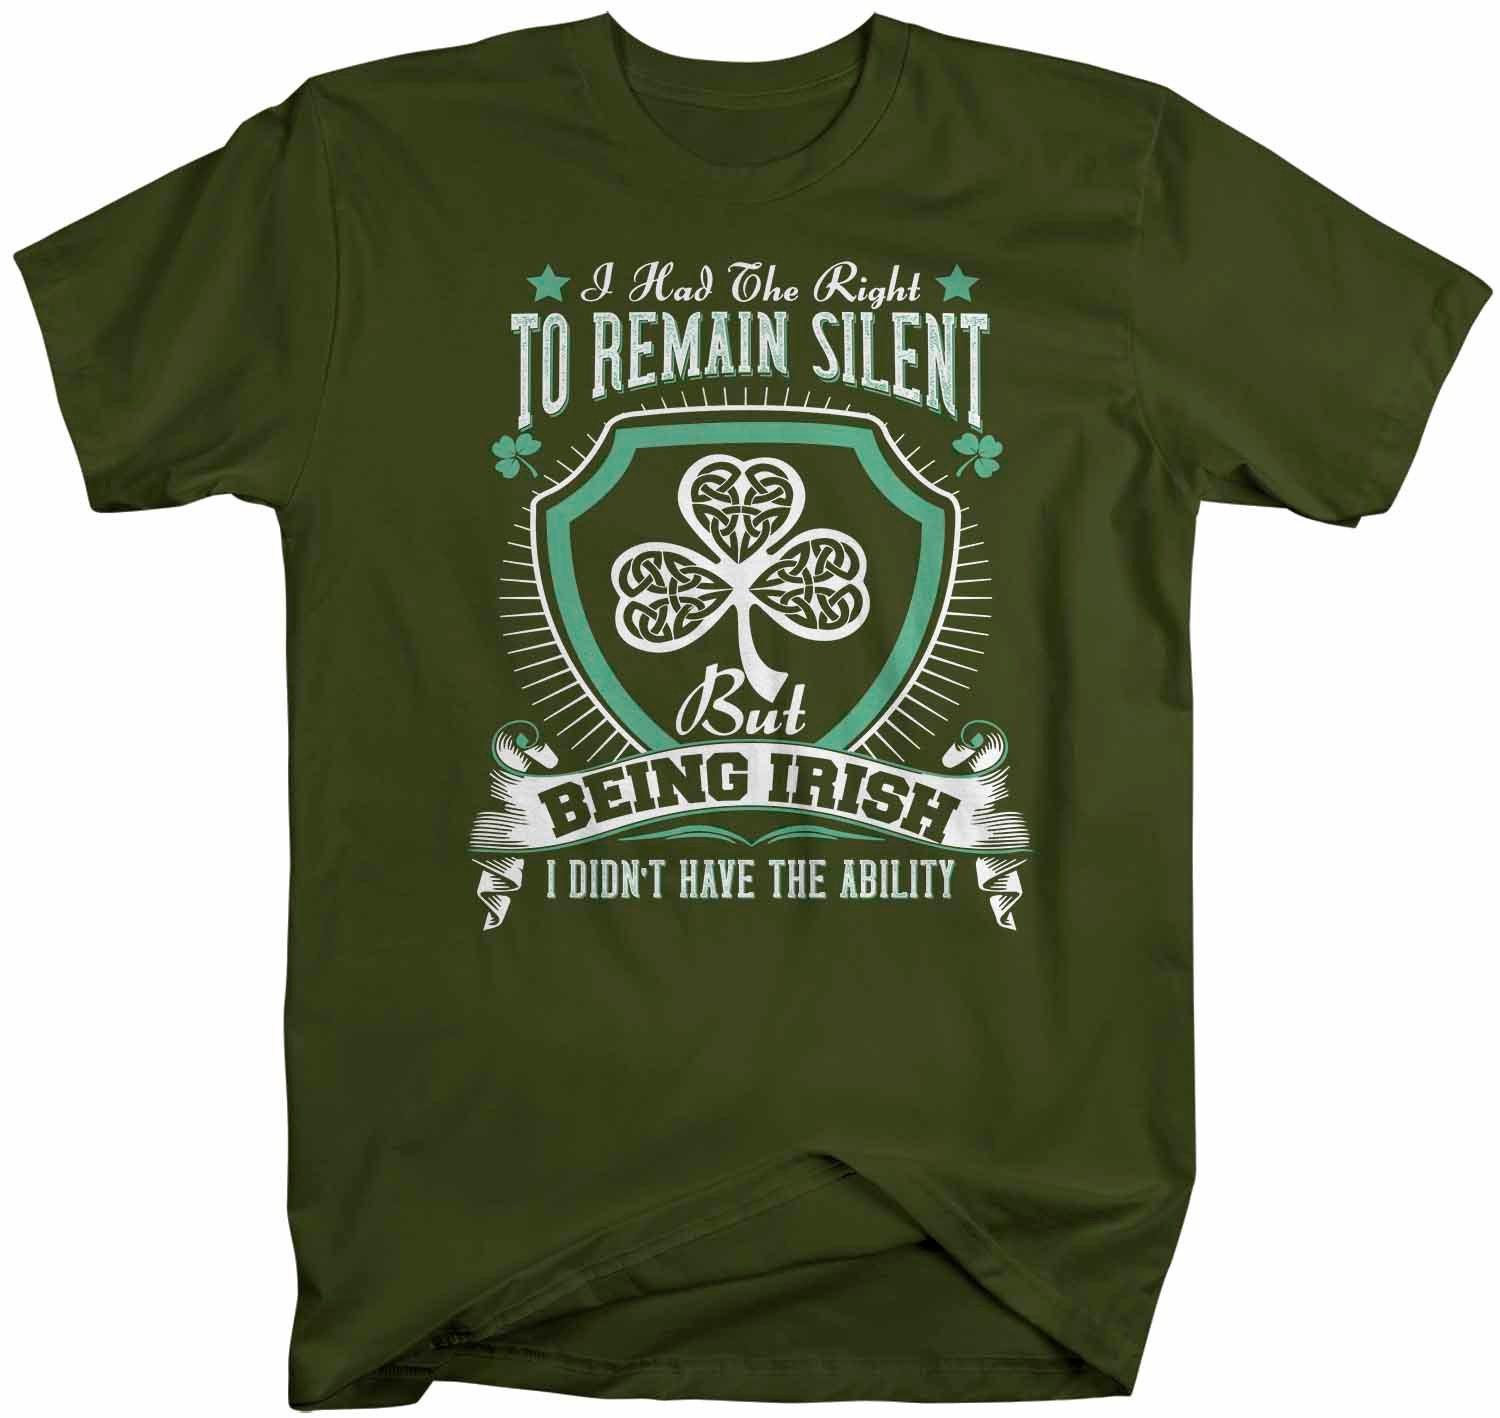 Details about   New We Can’t All Be Irish There Has To Be Someone Left To Envy Us T shirt 2021 